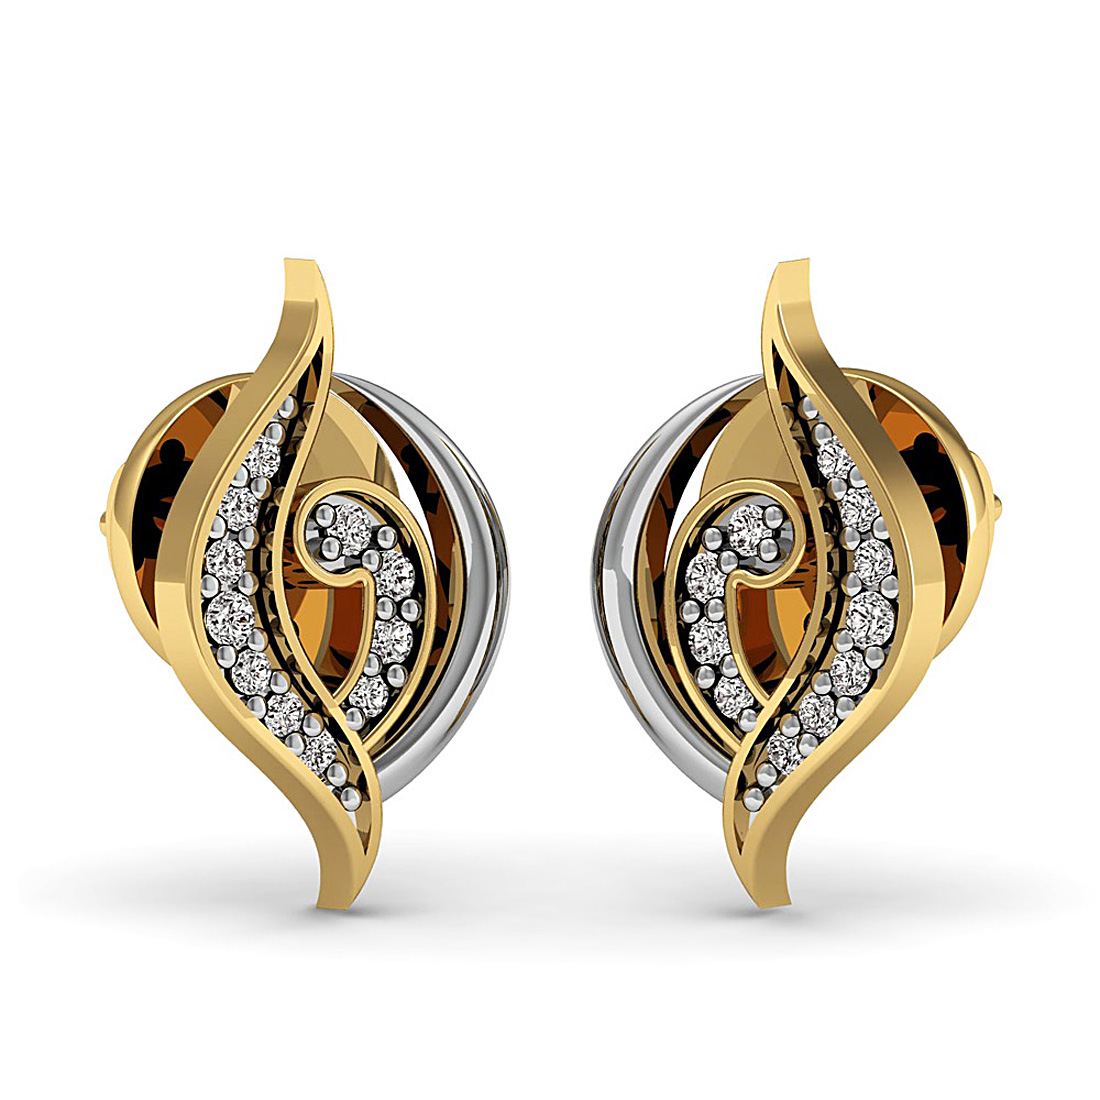 18k solid gold evil shape stud earrings with real diamond